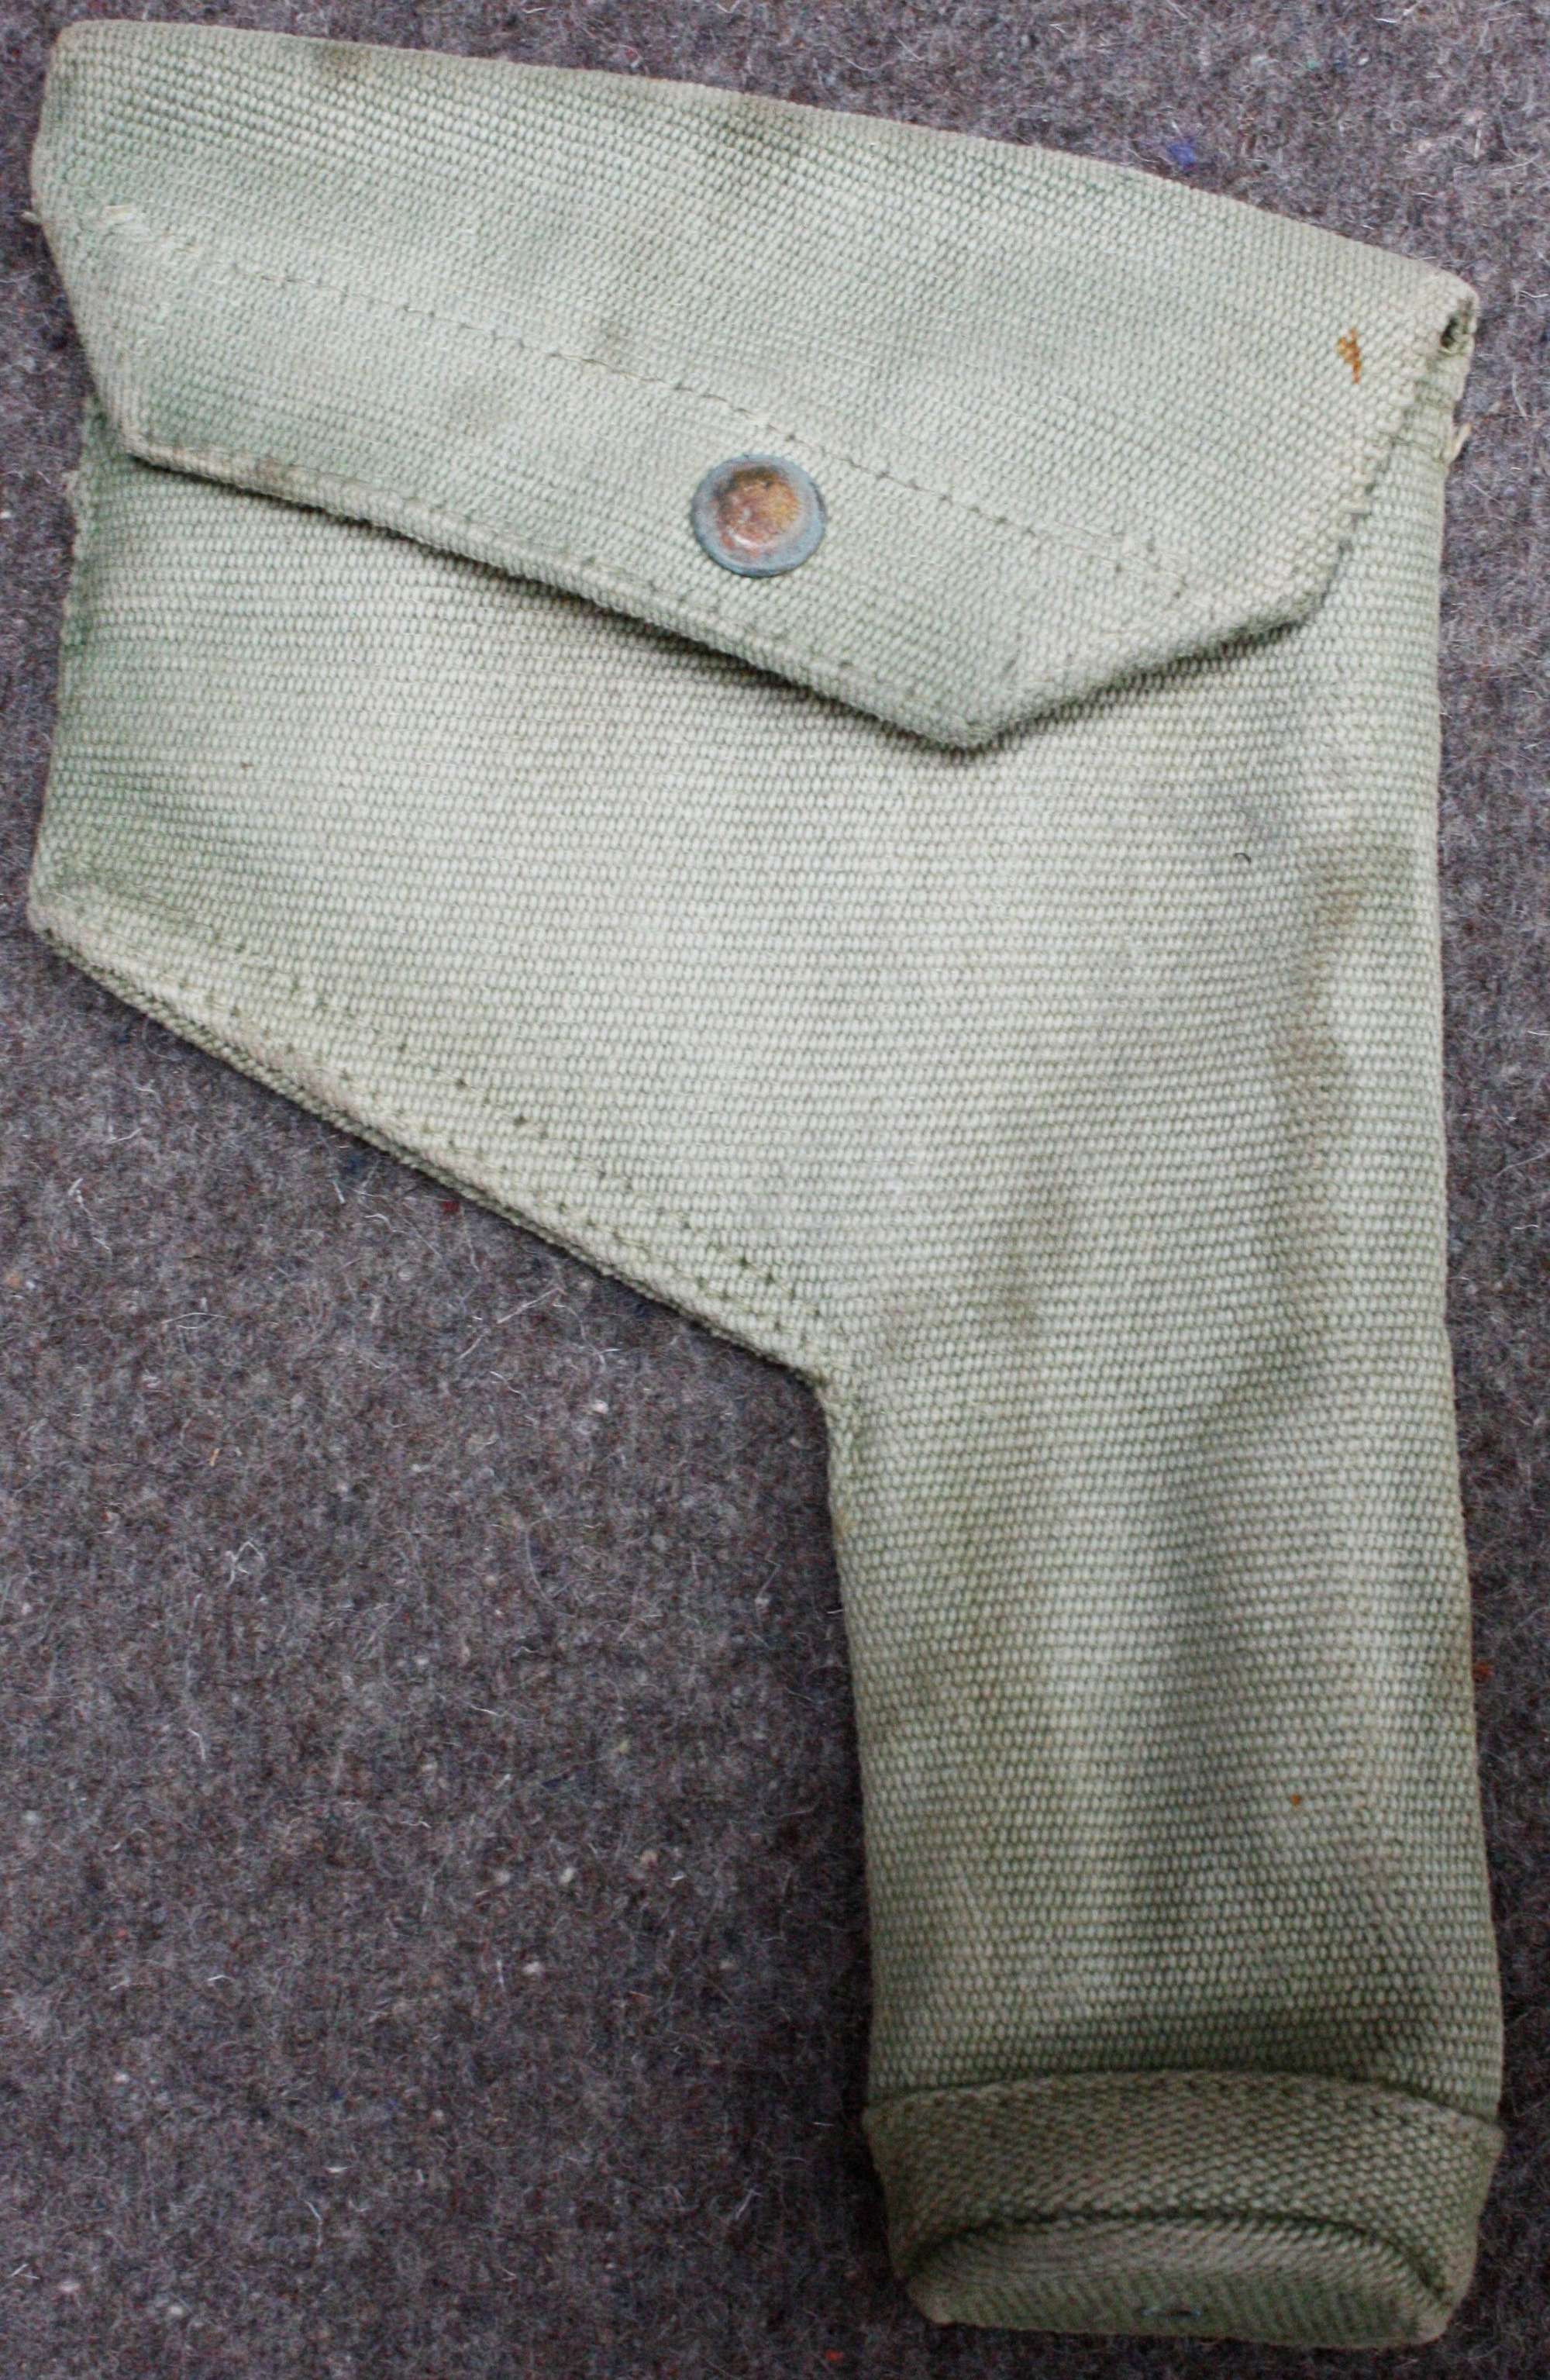 A WWII 37 PATTERN WEBBING USED HOLSTER